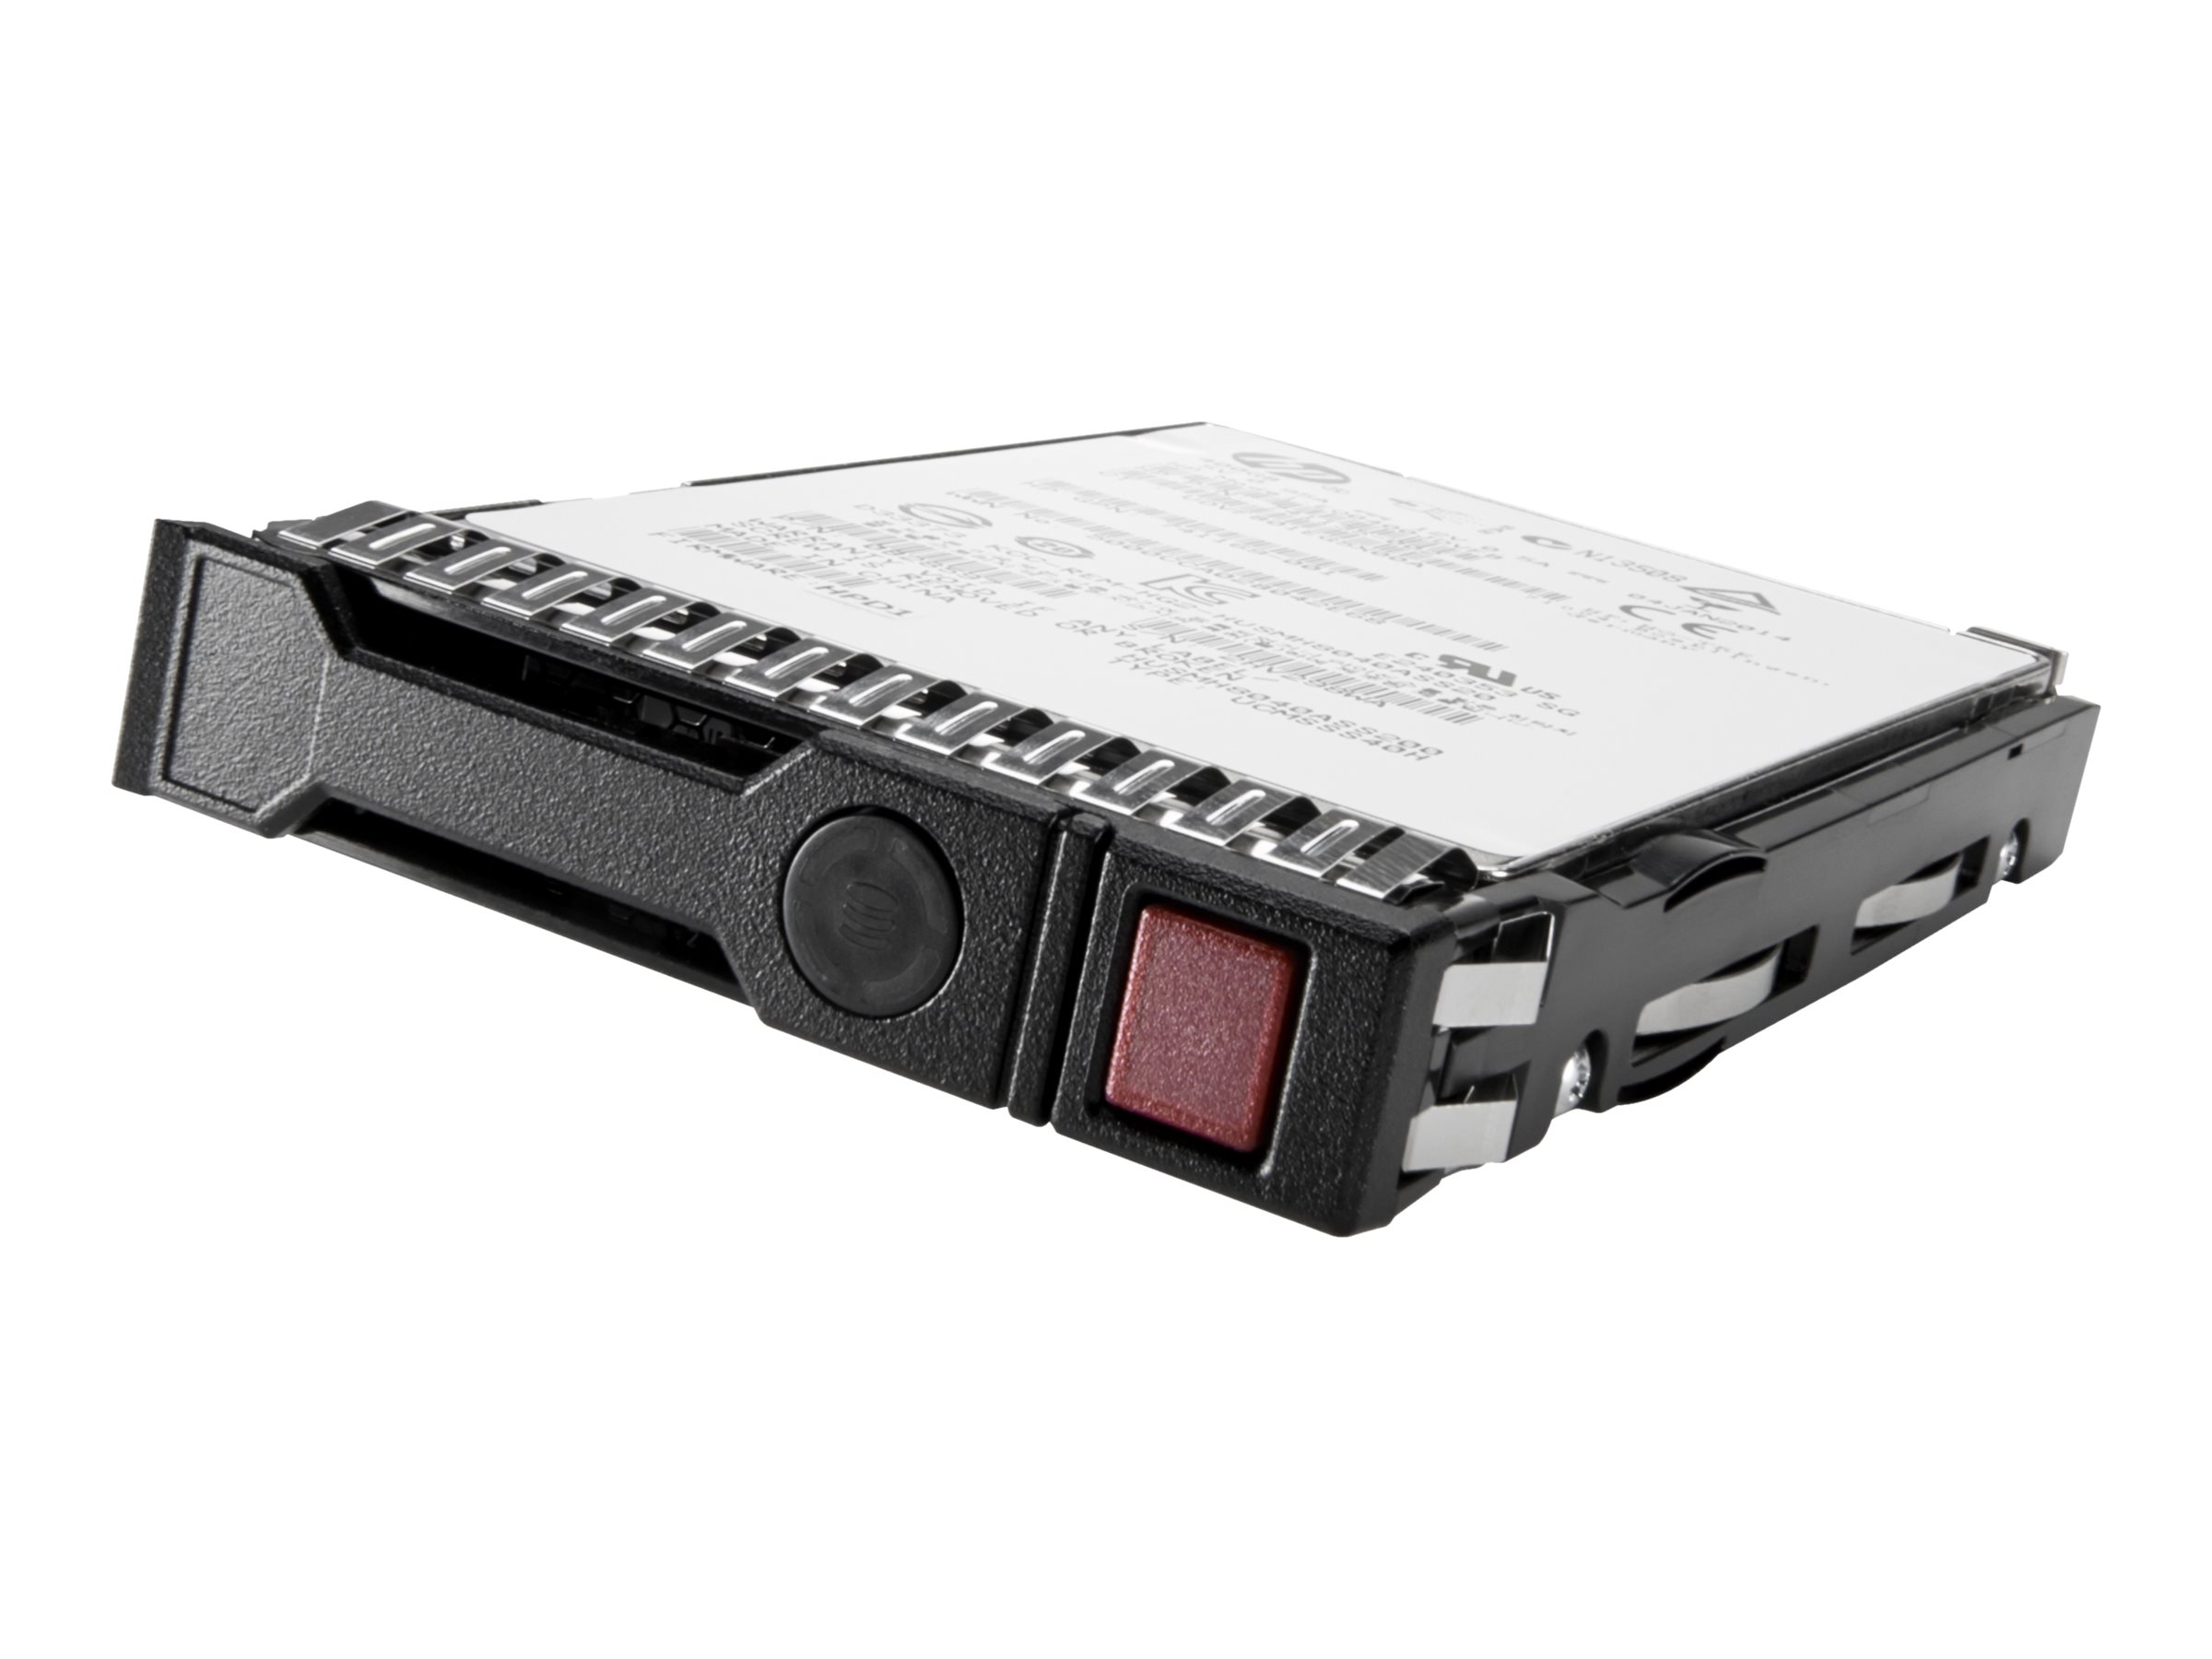 HPE PM897 - SSD - Mixed Use - 960 Go - échangeable à chaud - 2.5" SFF - SATA 6Gb/s - avec HPE Smart Carrier - P47815-B21 - Disques SSD